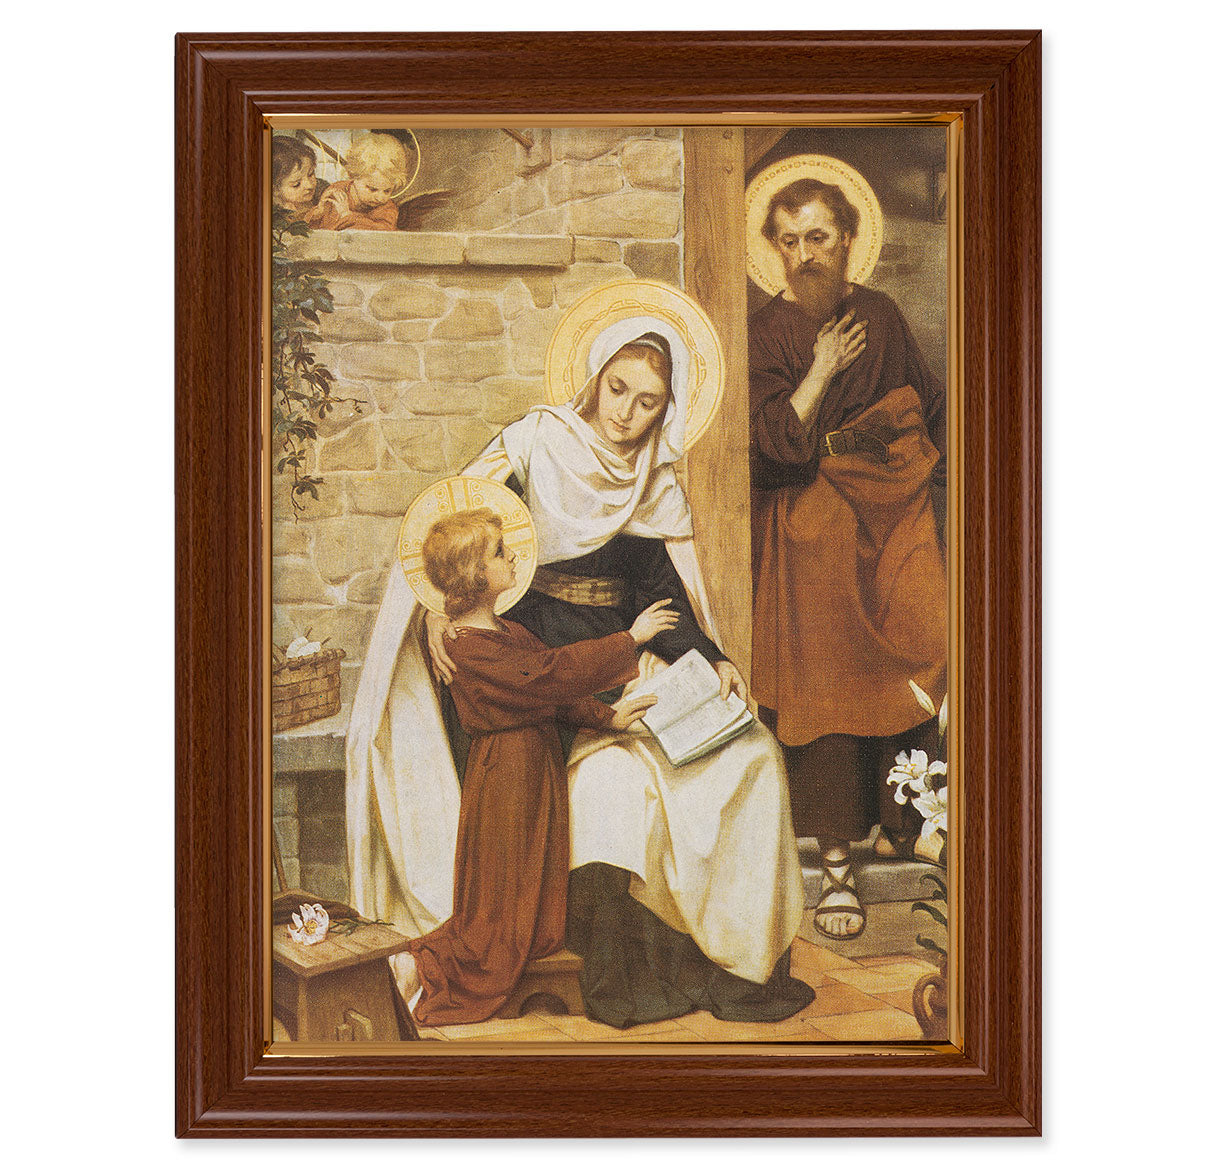 The Holy Family in Nazareth Picture Framed Wall Art Decor Extra Large, Traditional Dark Walnut Finished Frame with Thin Gold Lip